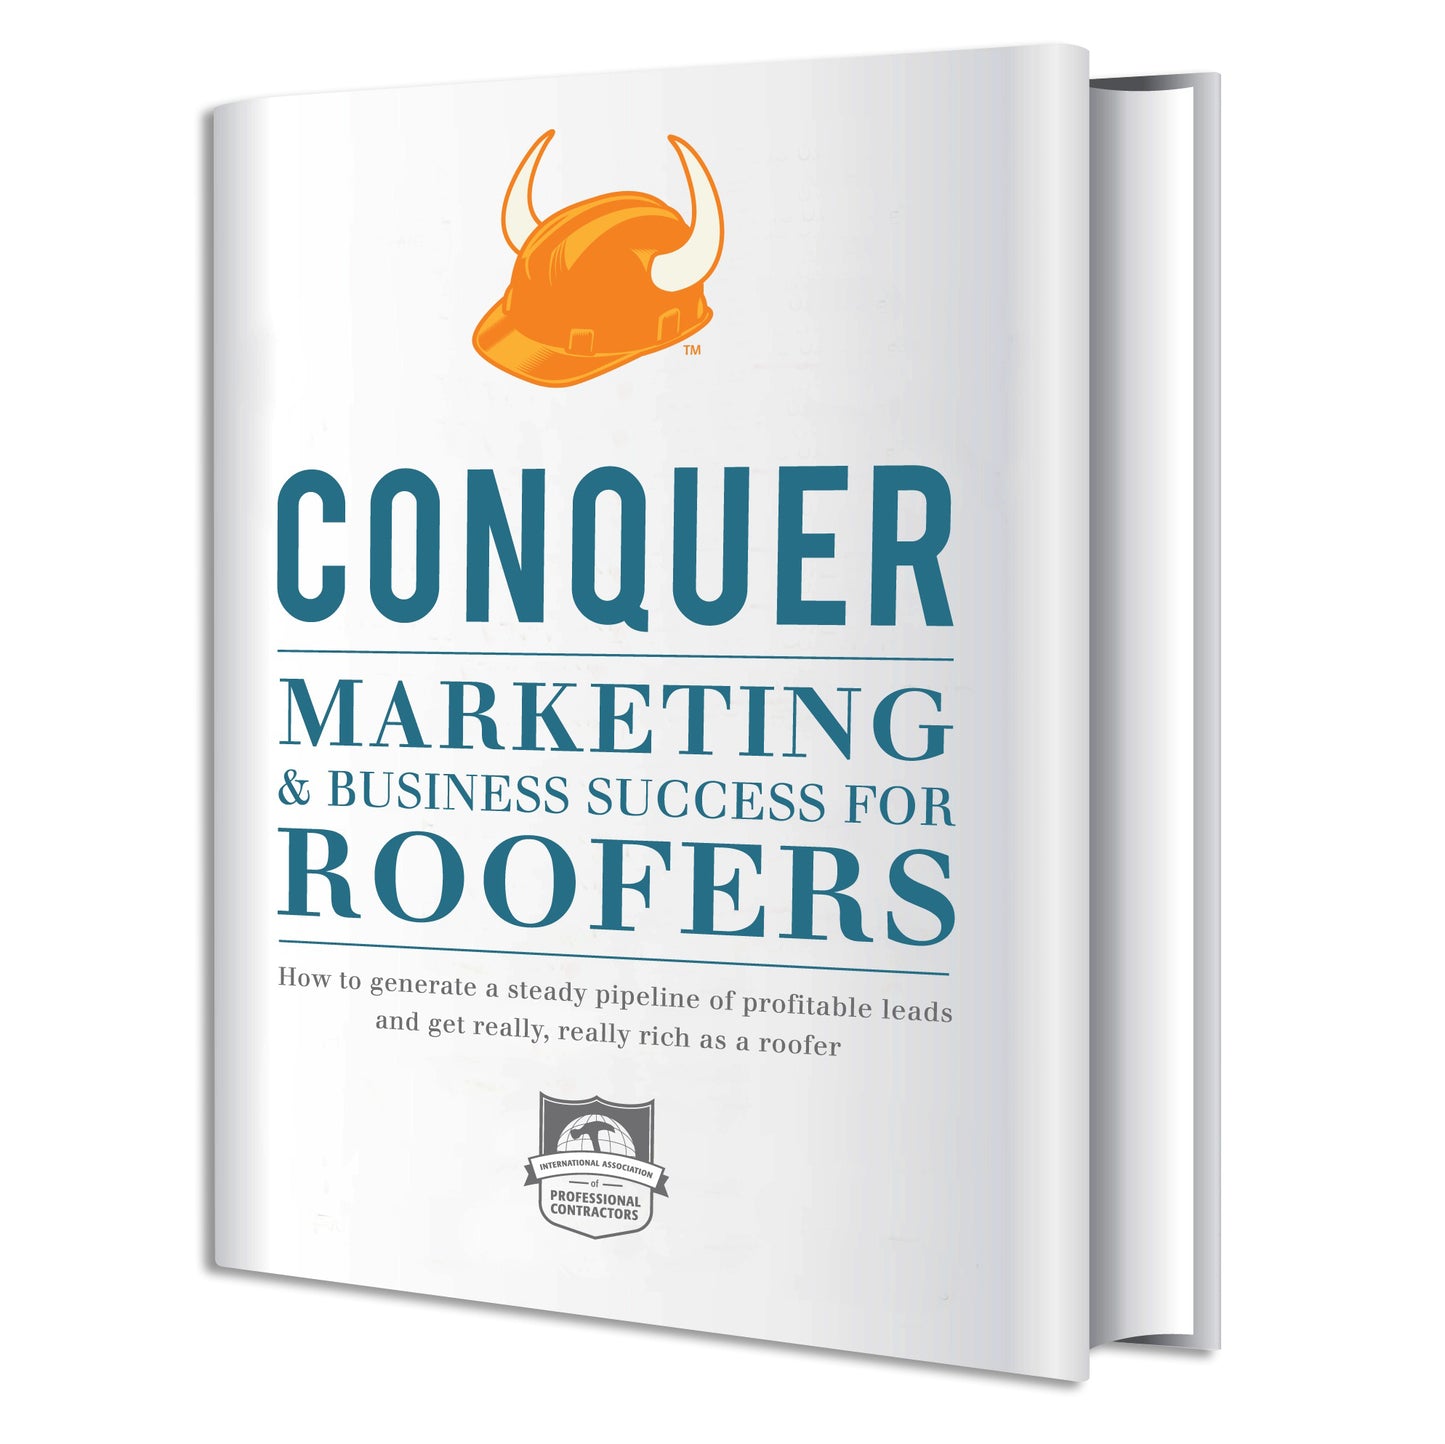 CONQUER Marketing and Business Success for Roofers PDF